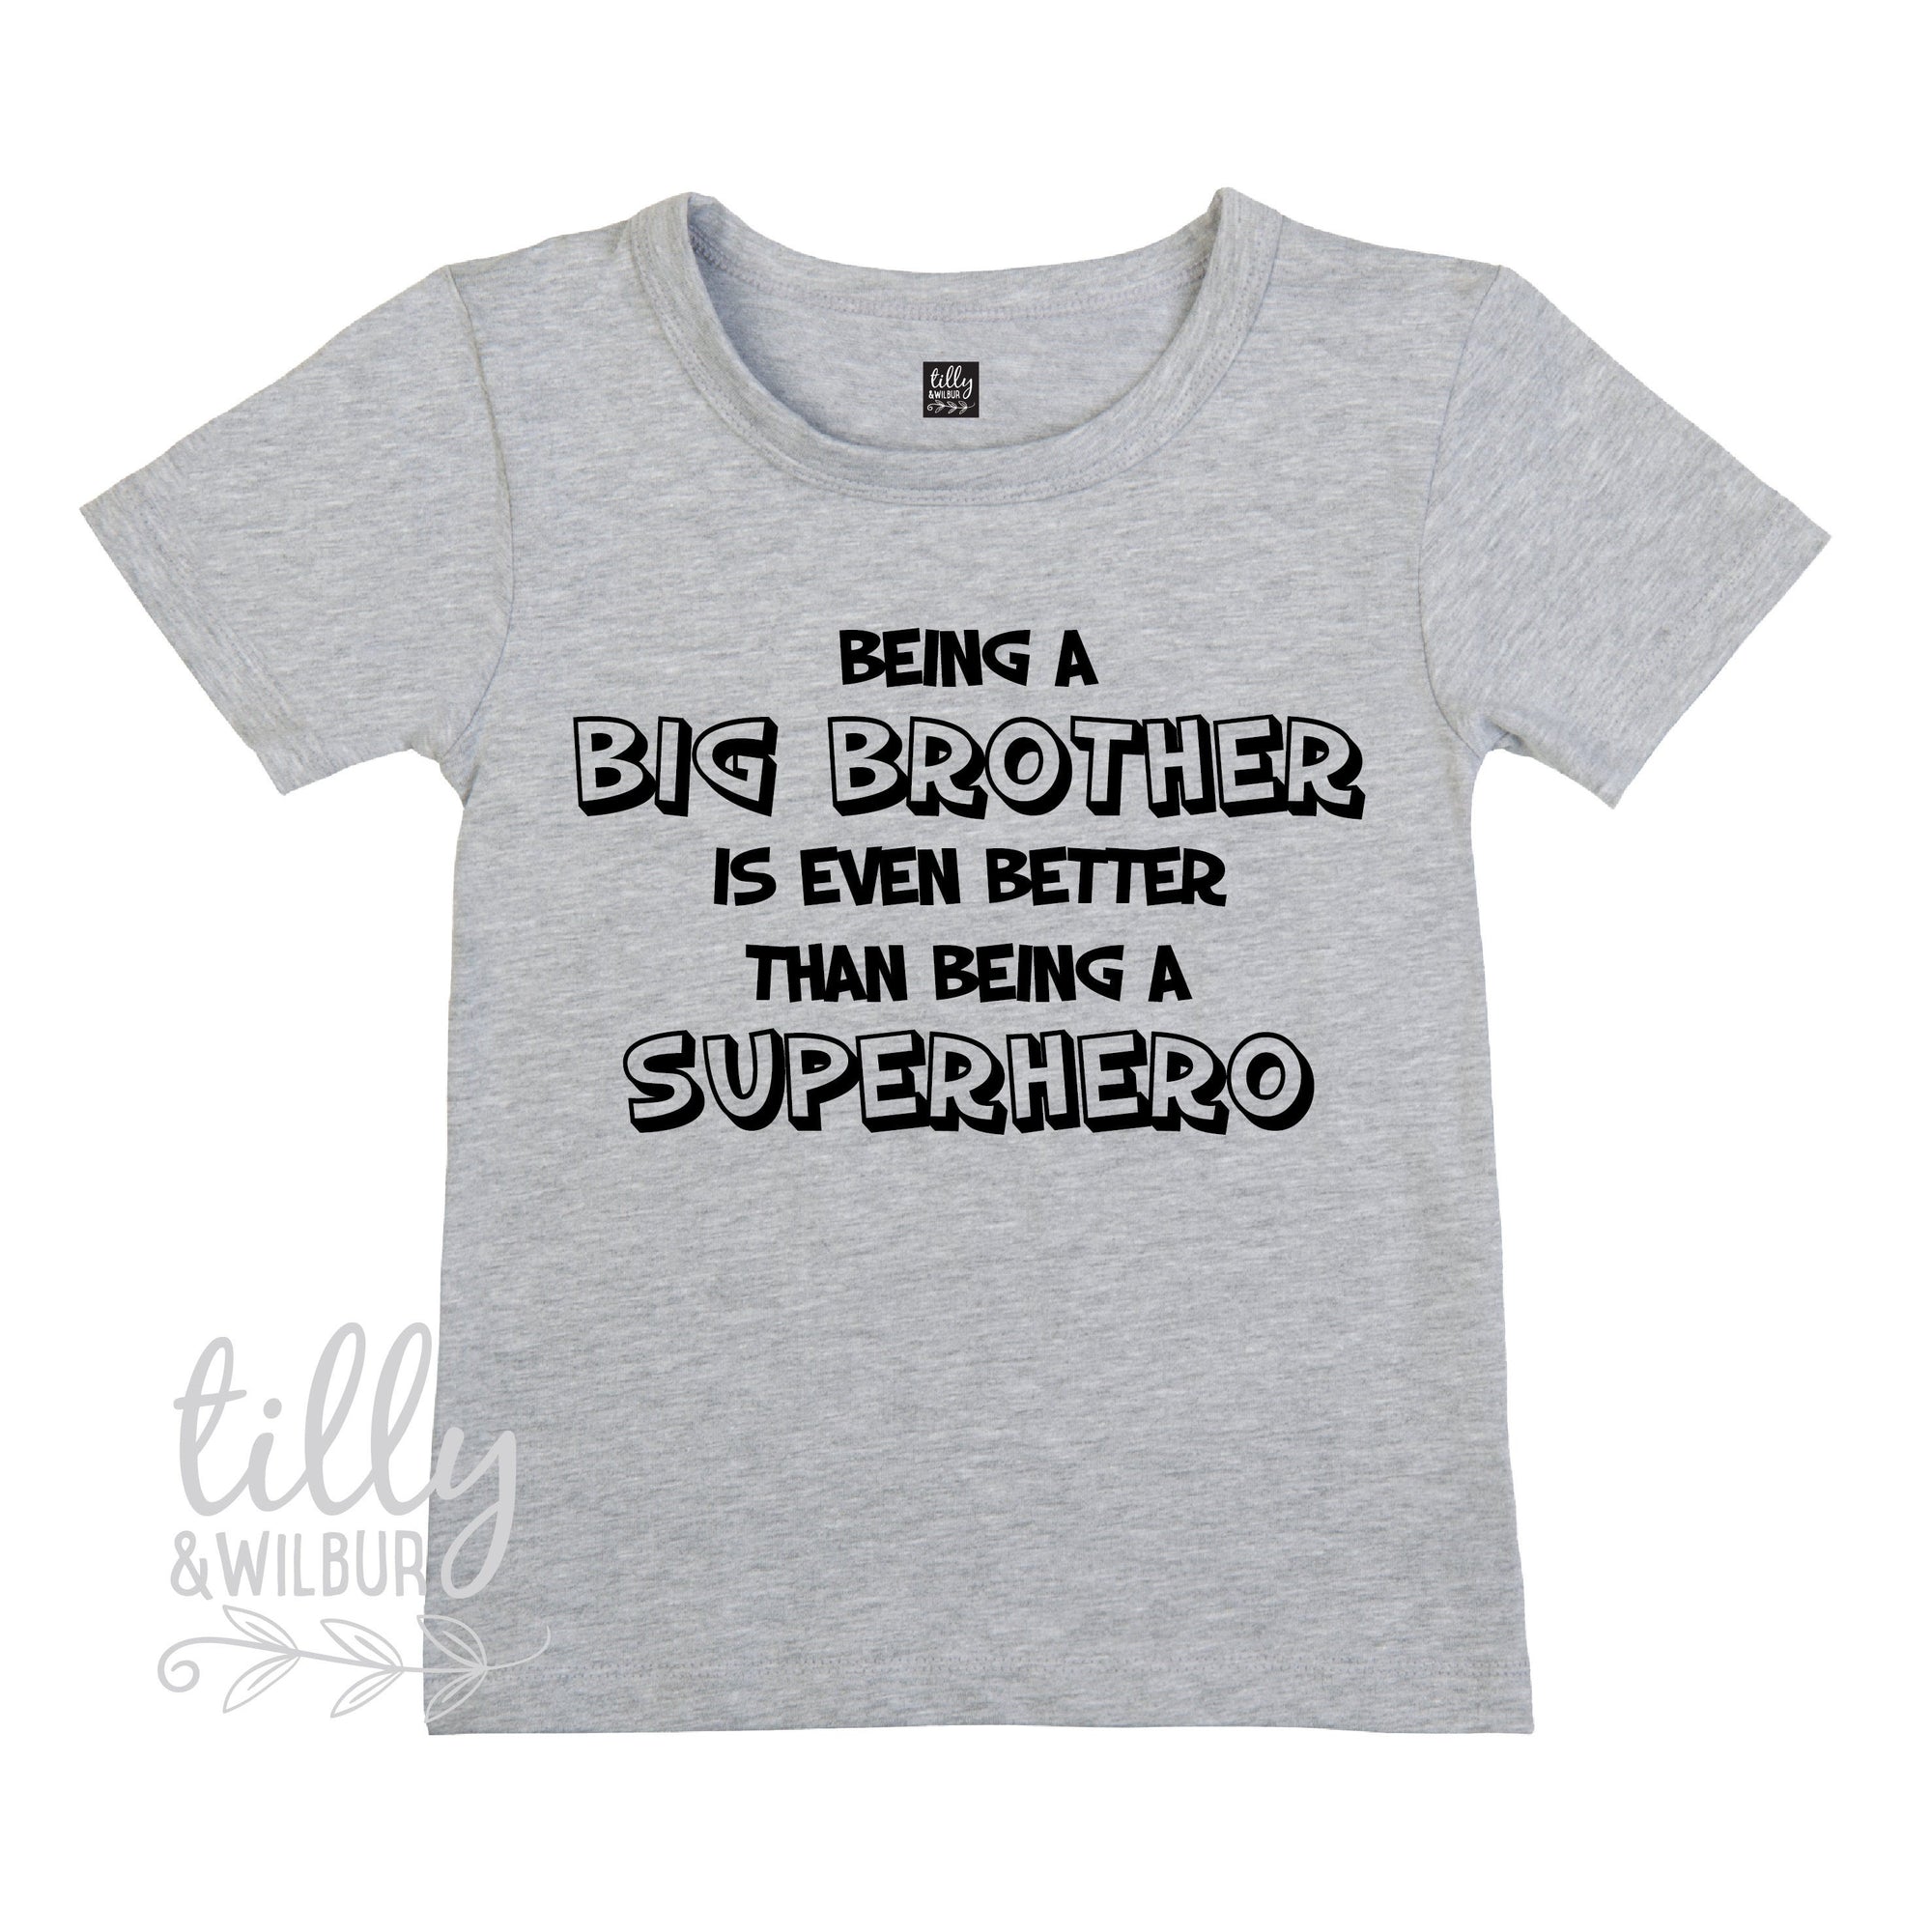 Being A Big Brother Is Even Better Than Being A Superhero T-Shirt, Promoted To Big Brother, Big Brother T-Shirt, Pregnancy Announcement Tee